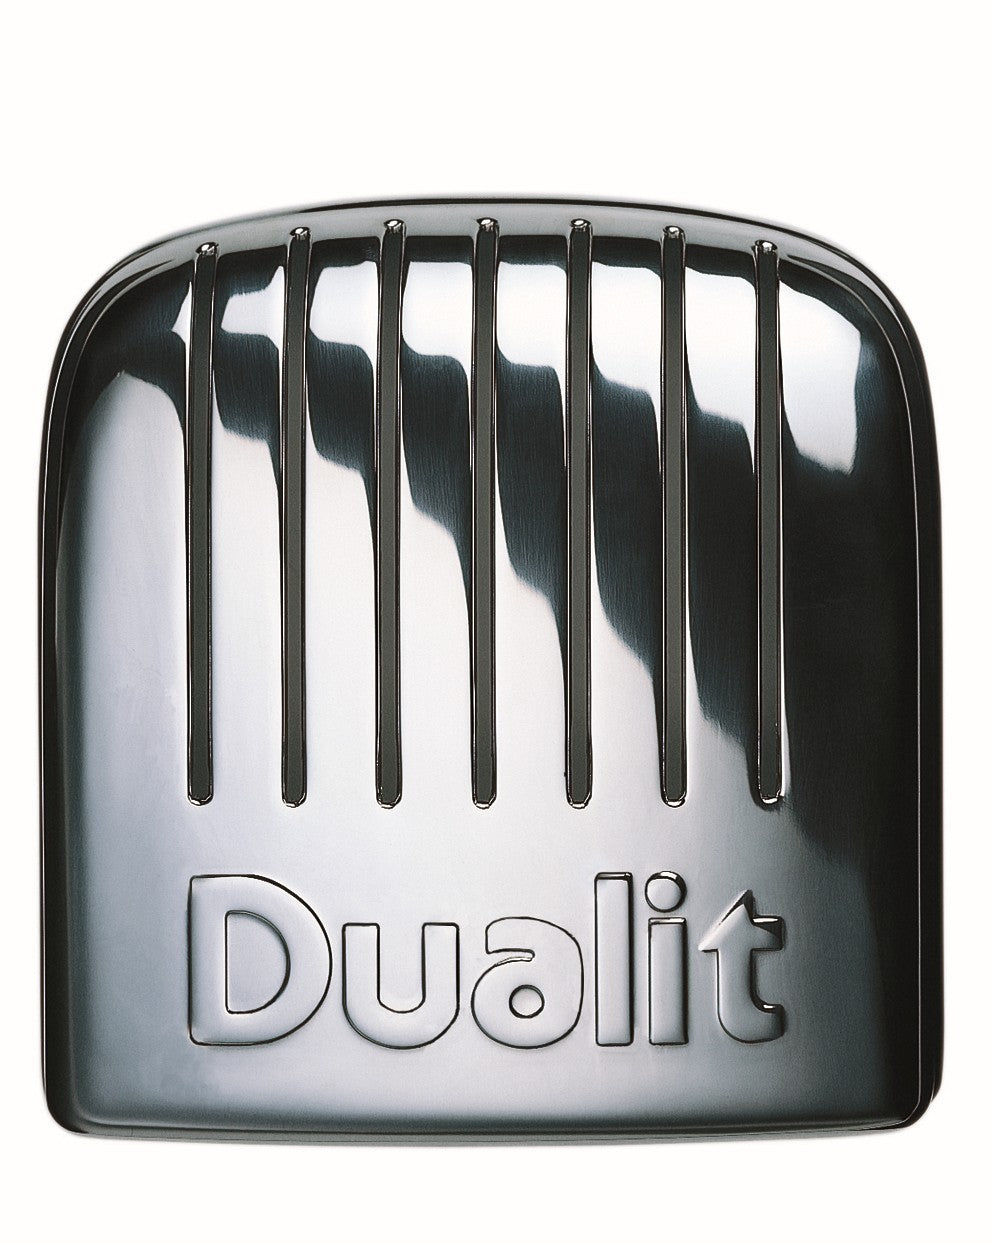 Dualit Classic 2er-Toaster